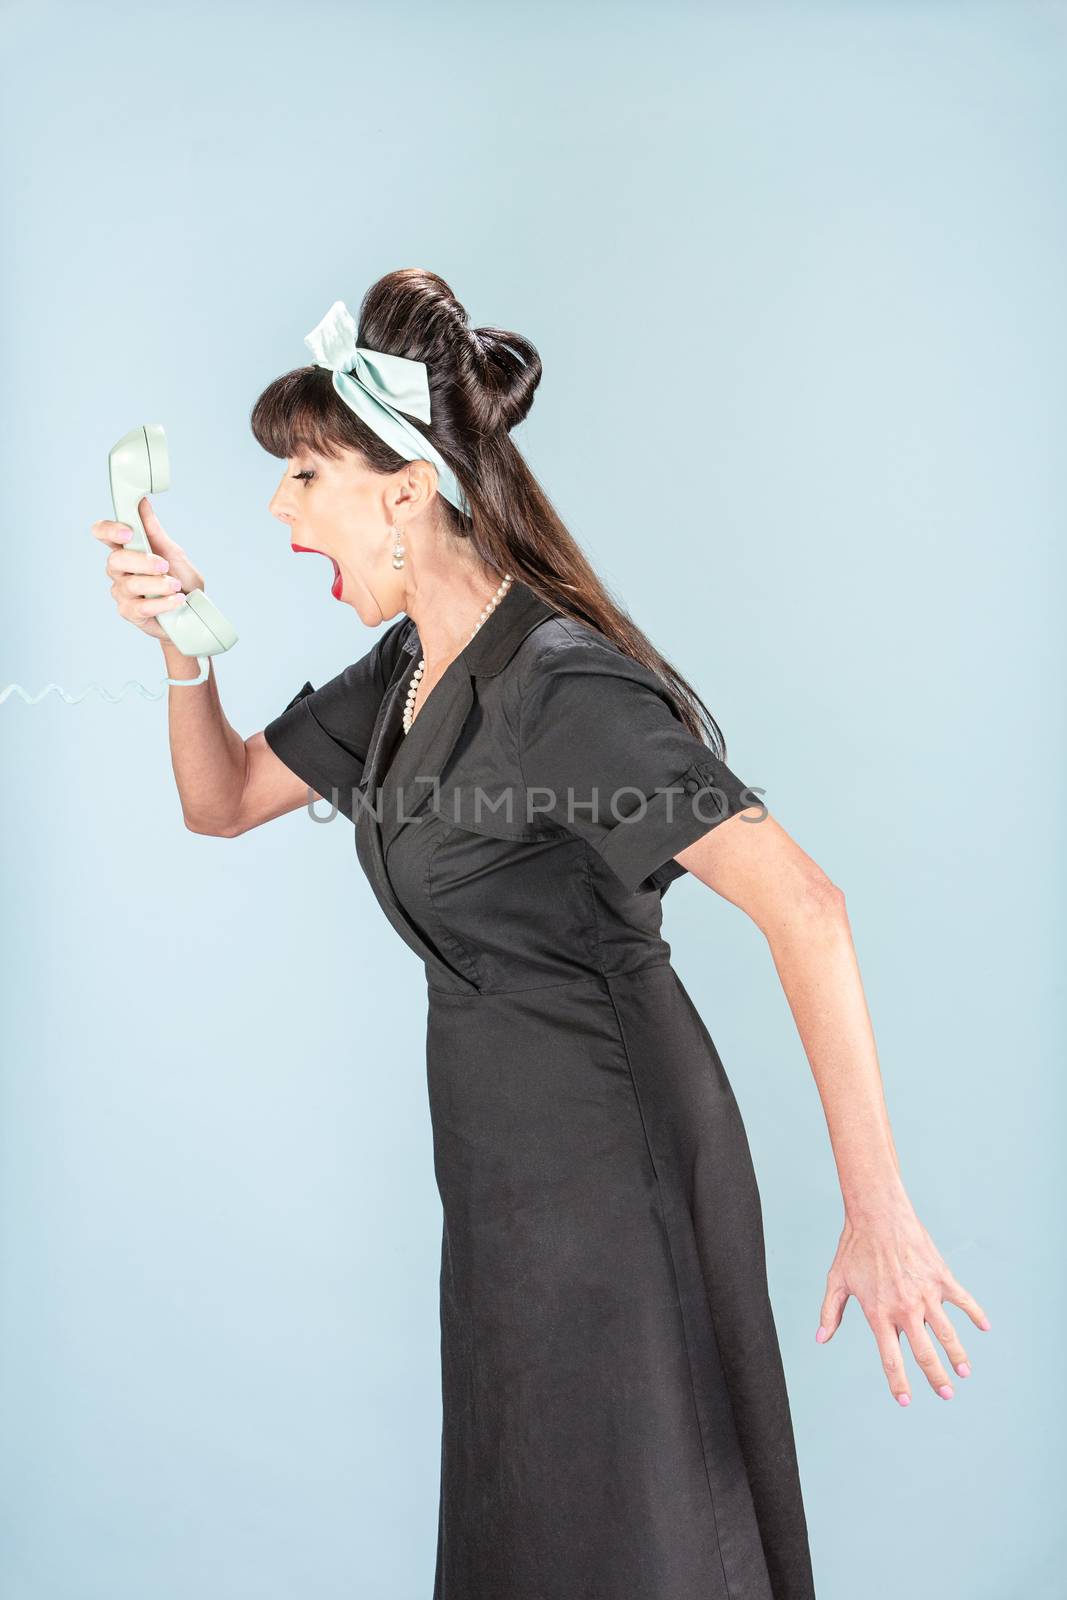 Yelling Retro Woman in Black Dress with Phone Receiver by Creatista